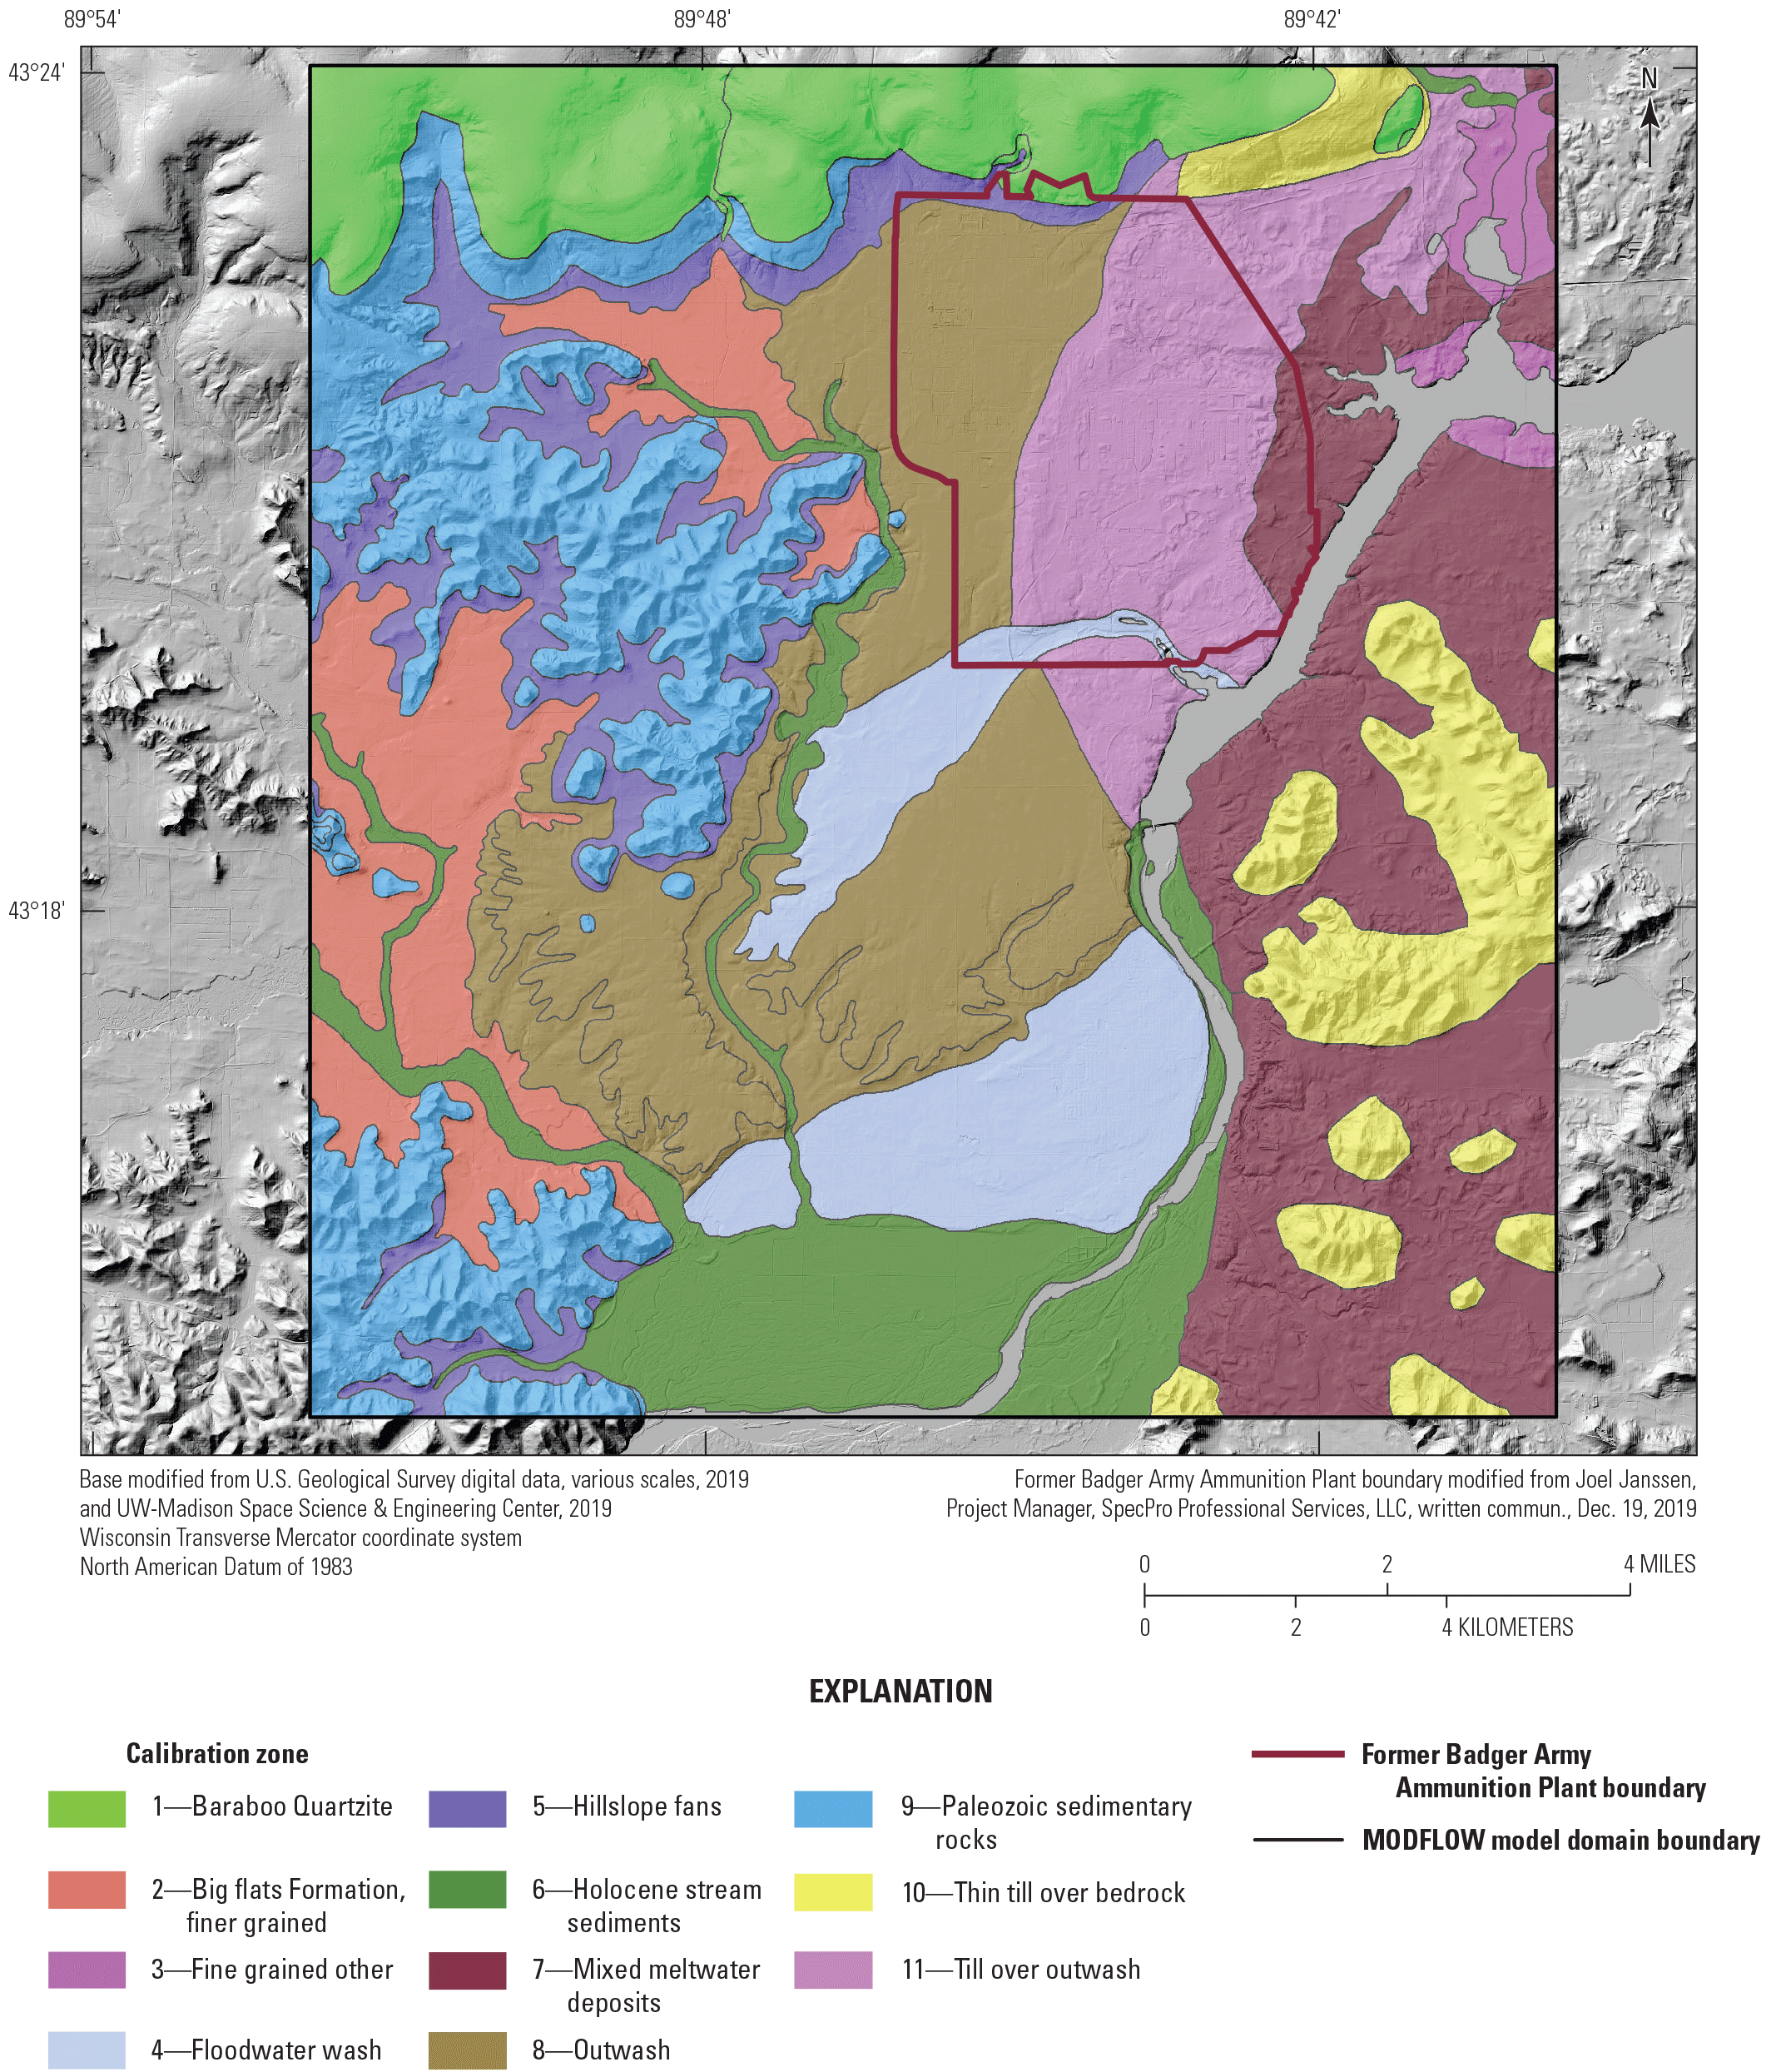 11 calibration zones were used for the calibration of the Soil-Water-Balance model.
                  These zones are based on the surficial geologic units.